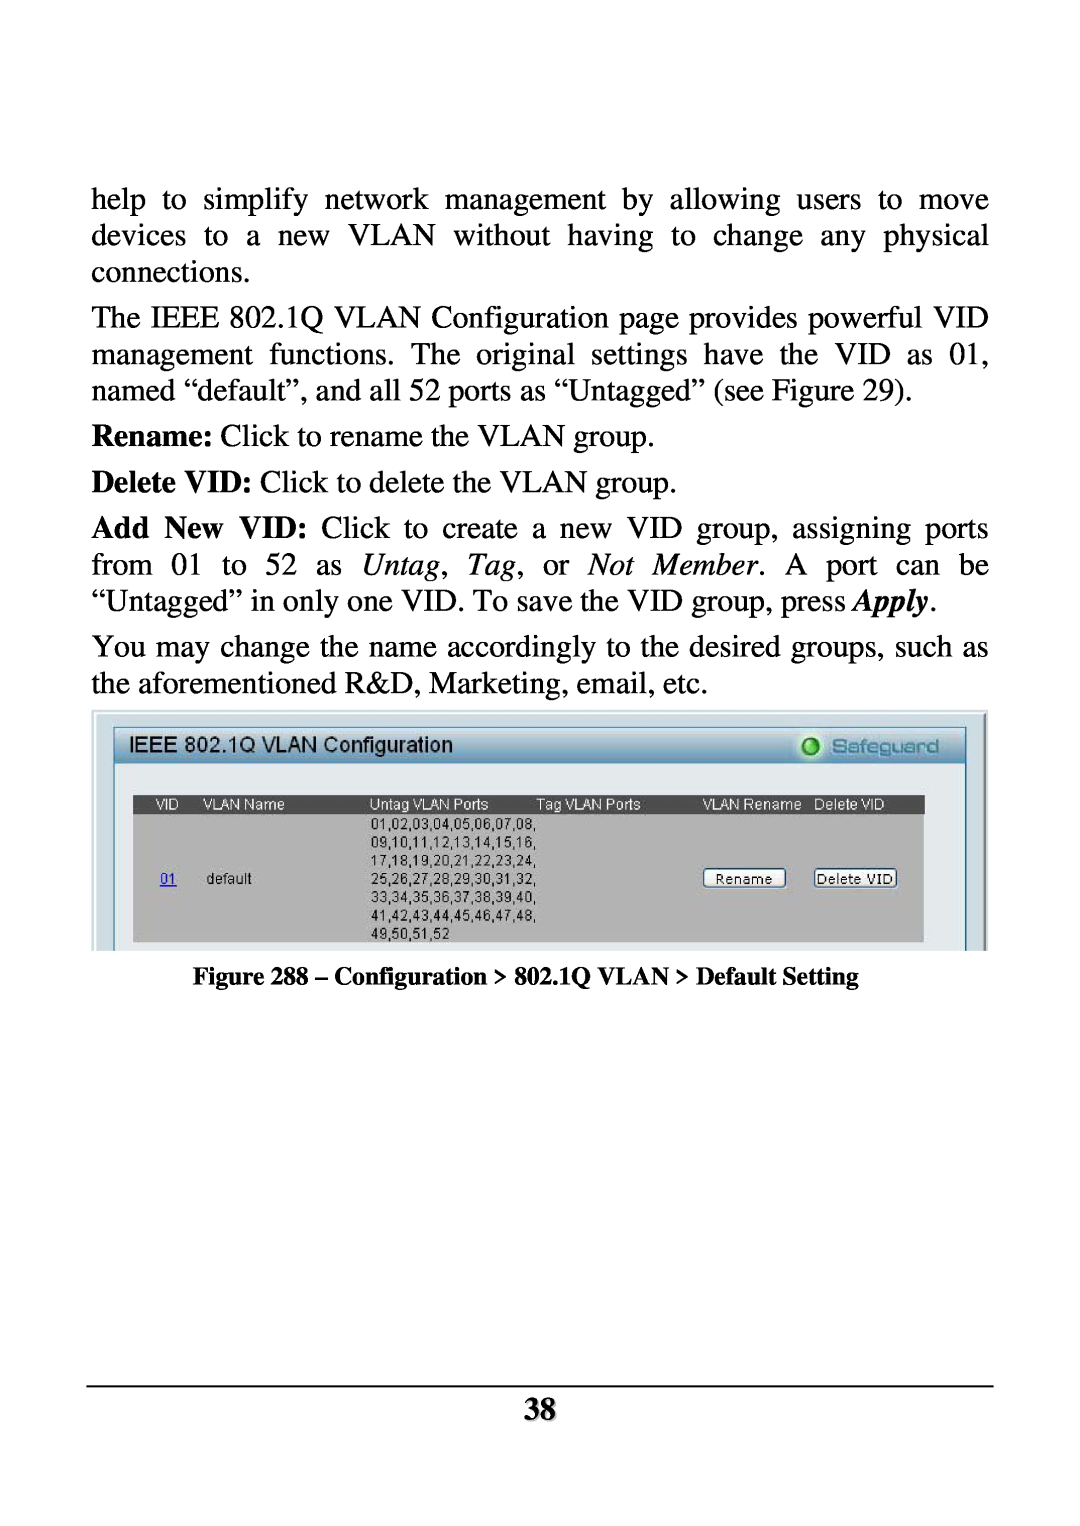 D-Link DES-1252 user manual Rename Click to rename the VLAN group 